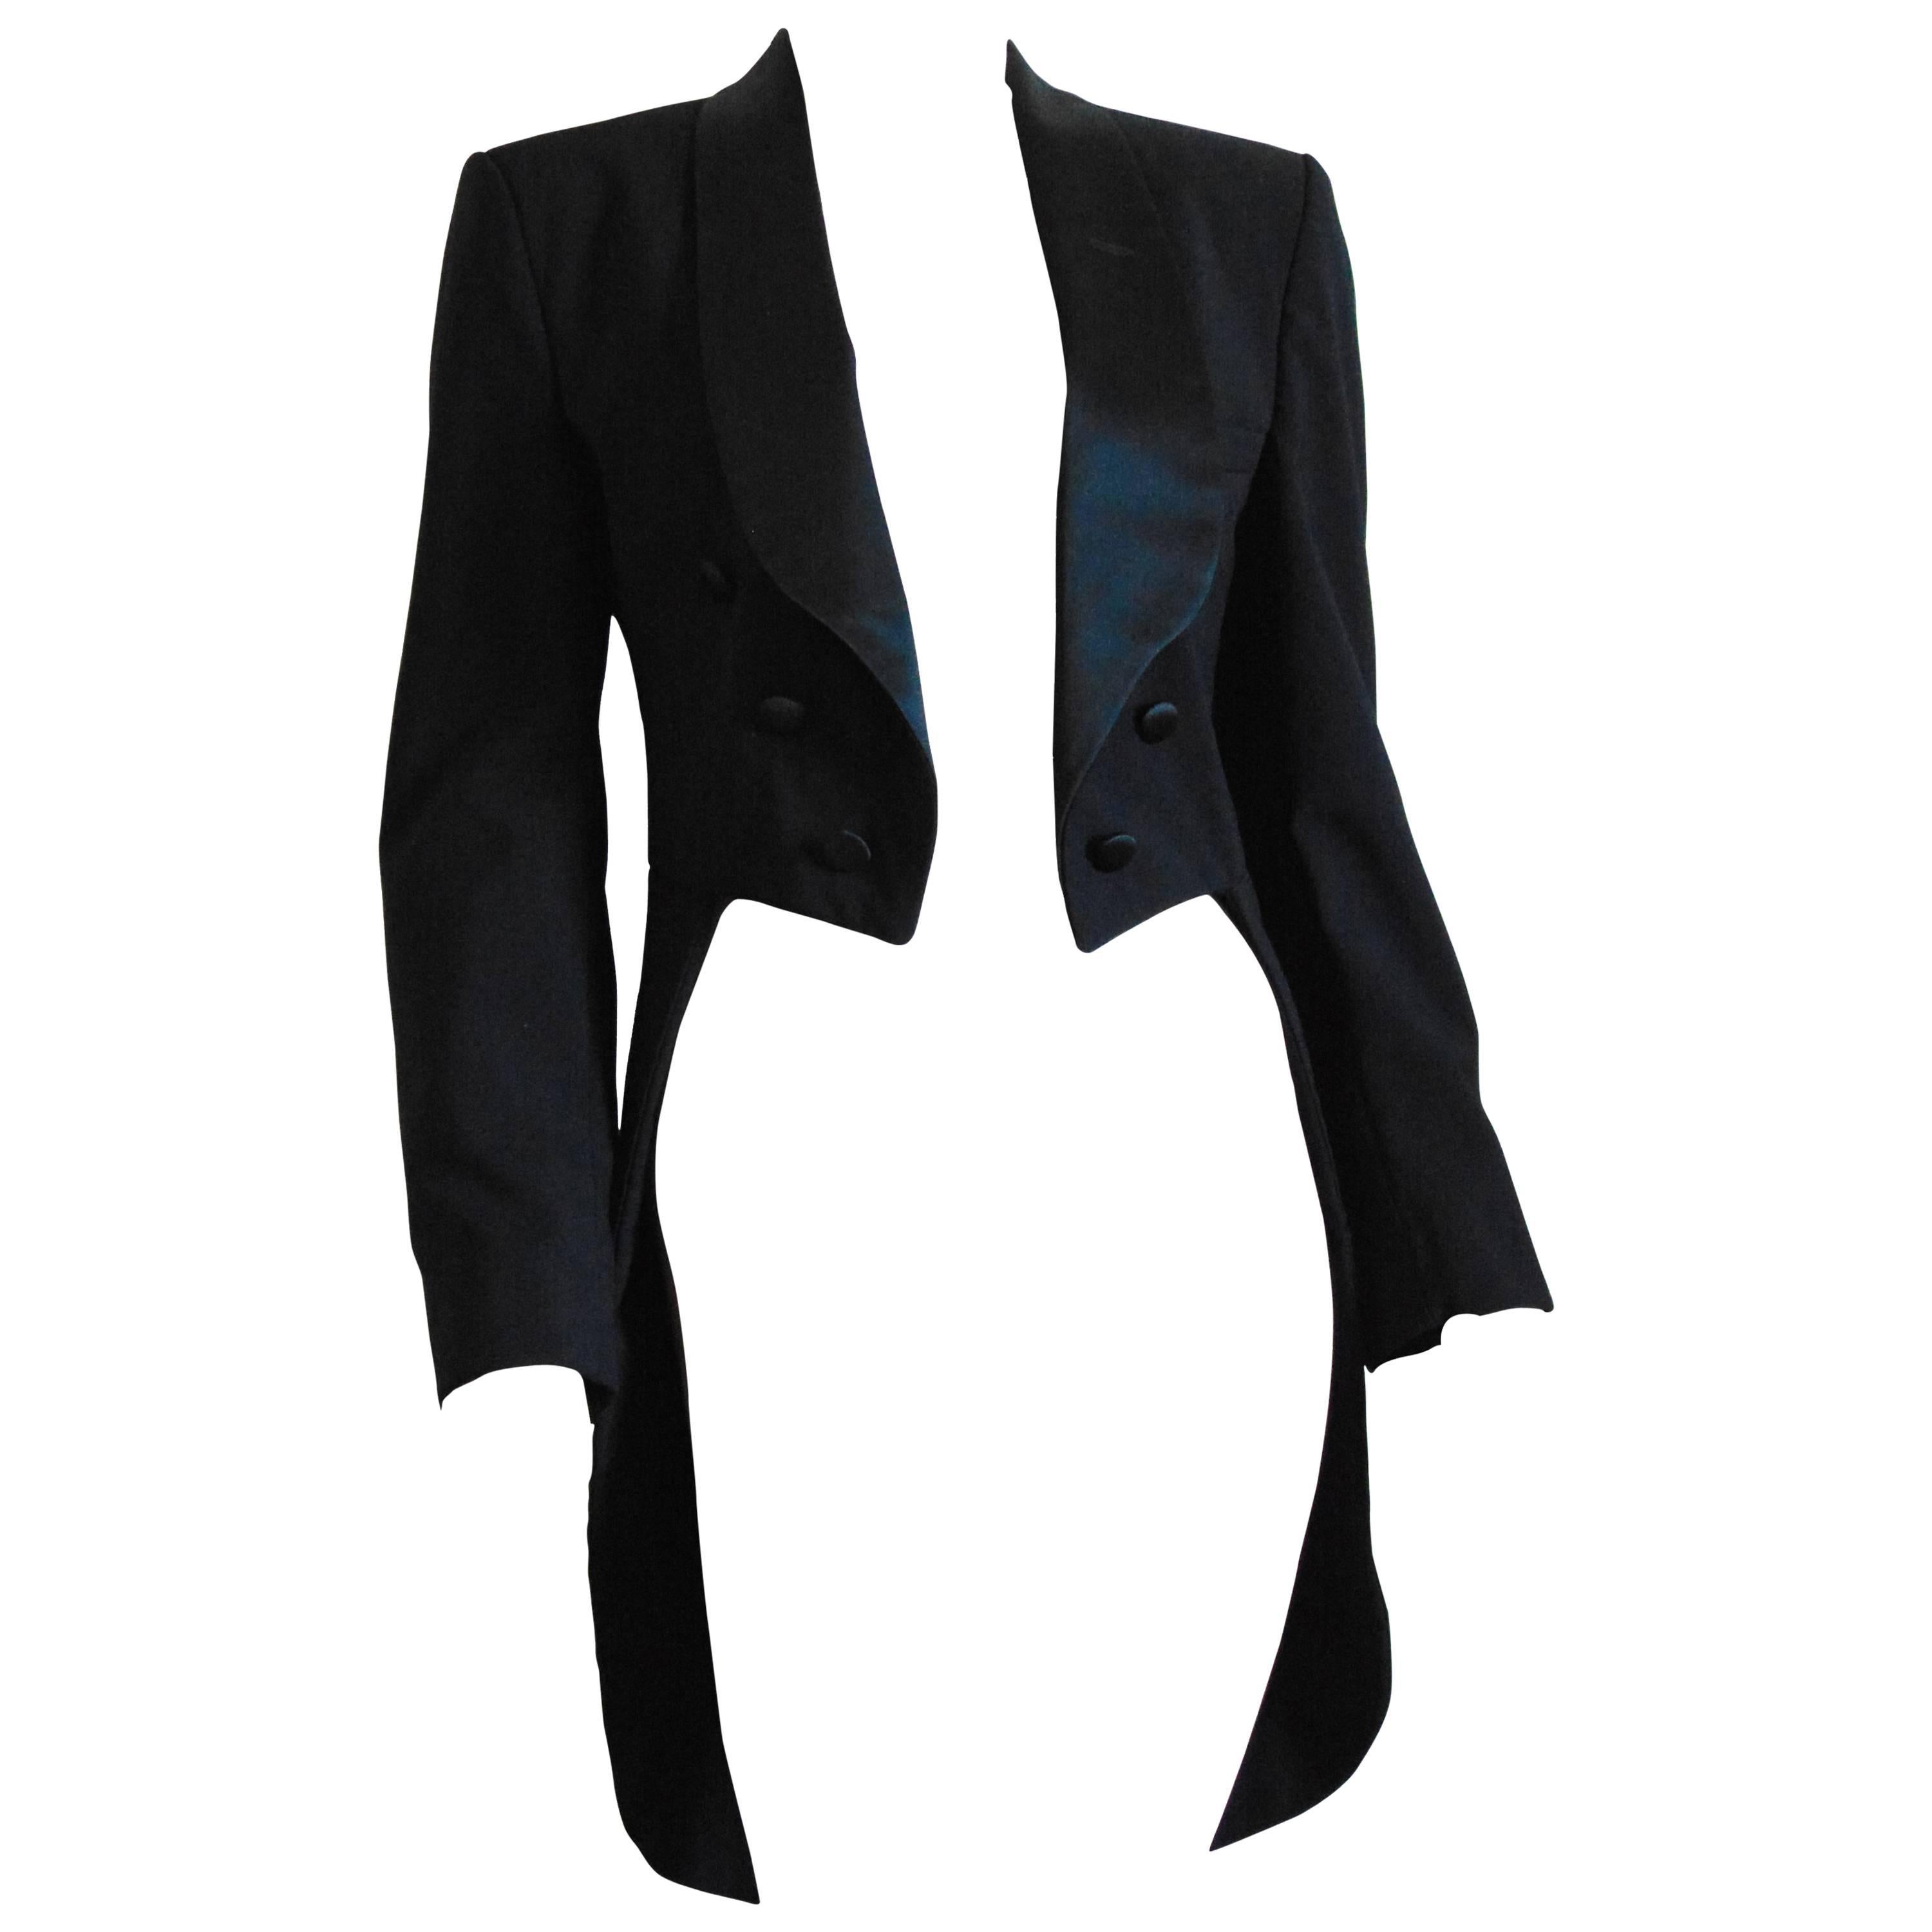 Christian Dior Jeune Homme Tuxedo Jacket With Tails Black Wool Size S/M 1980s